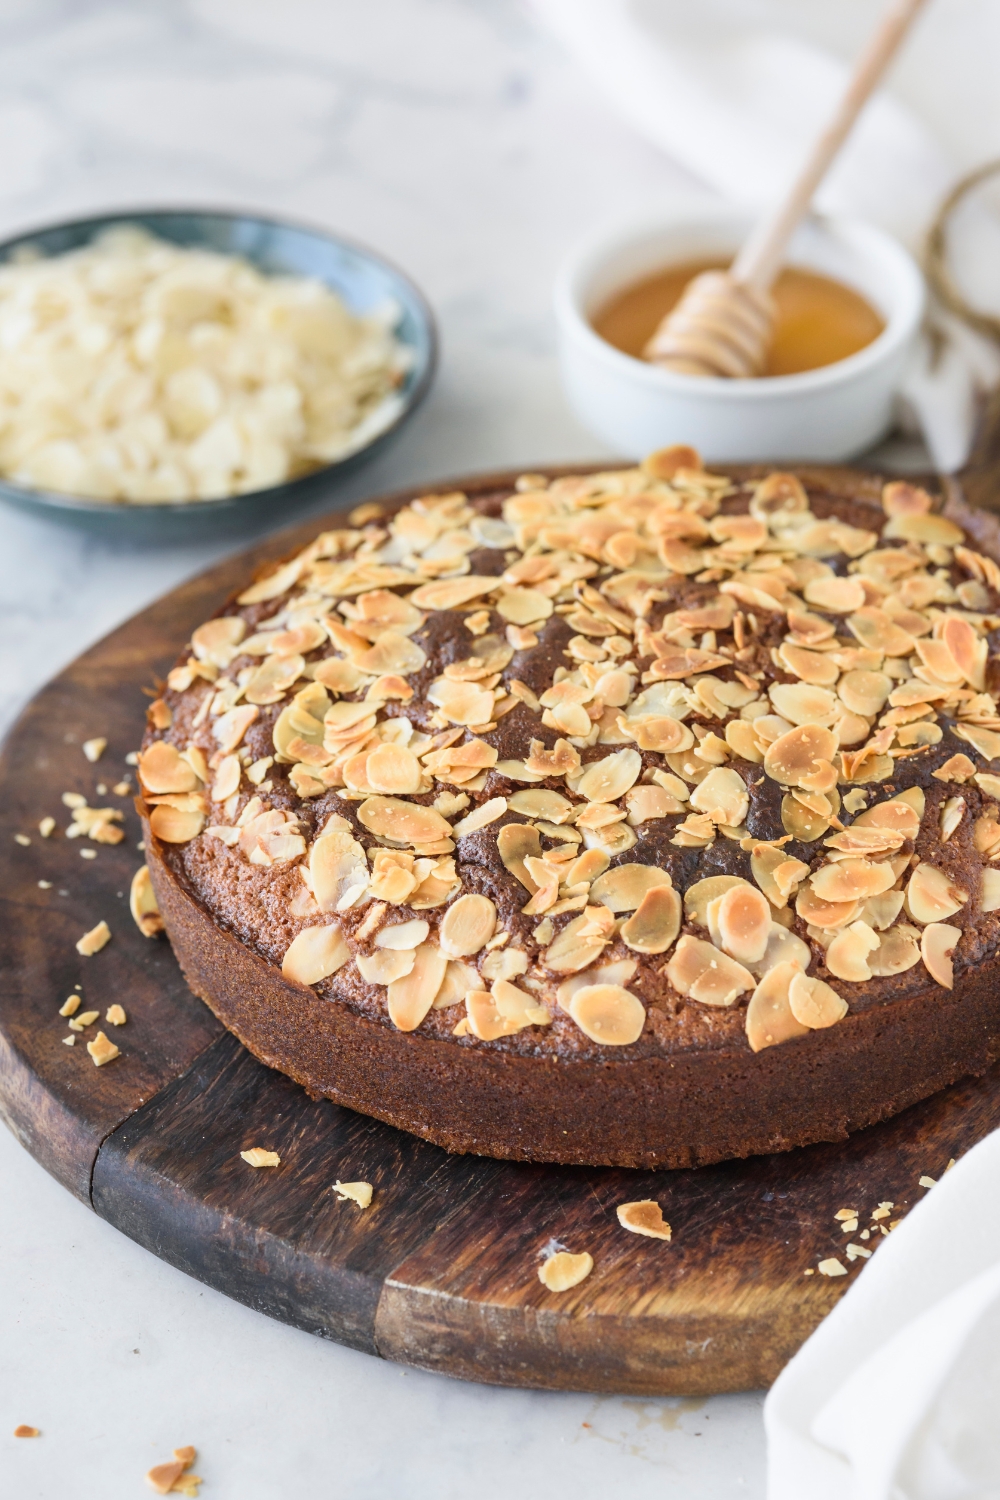 Honey cake topped with sliced almonds and served on a round wooden board.